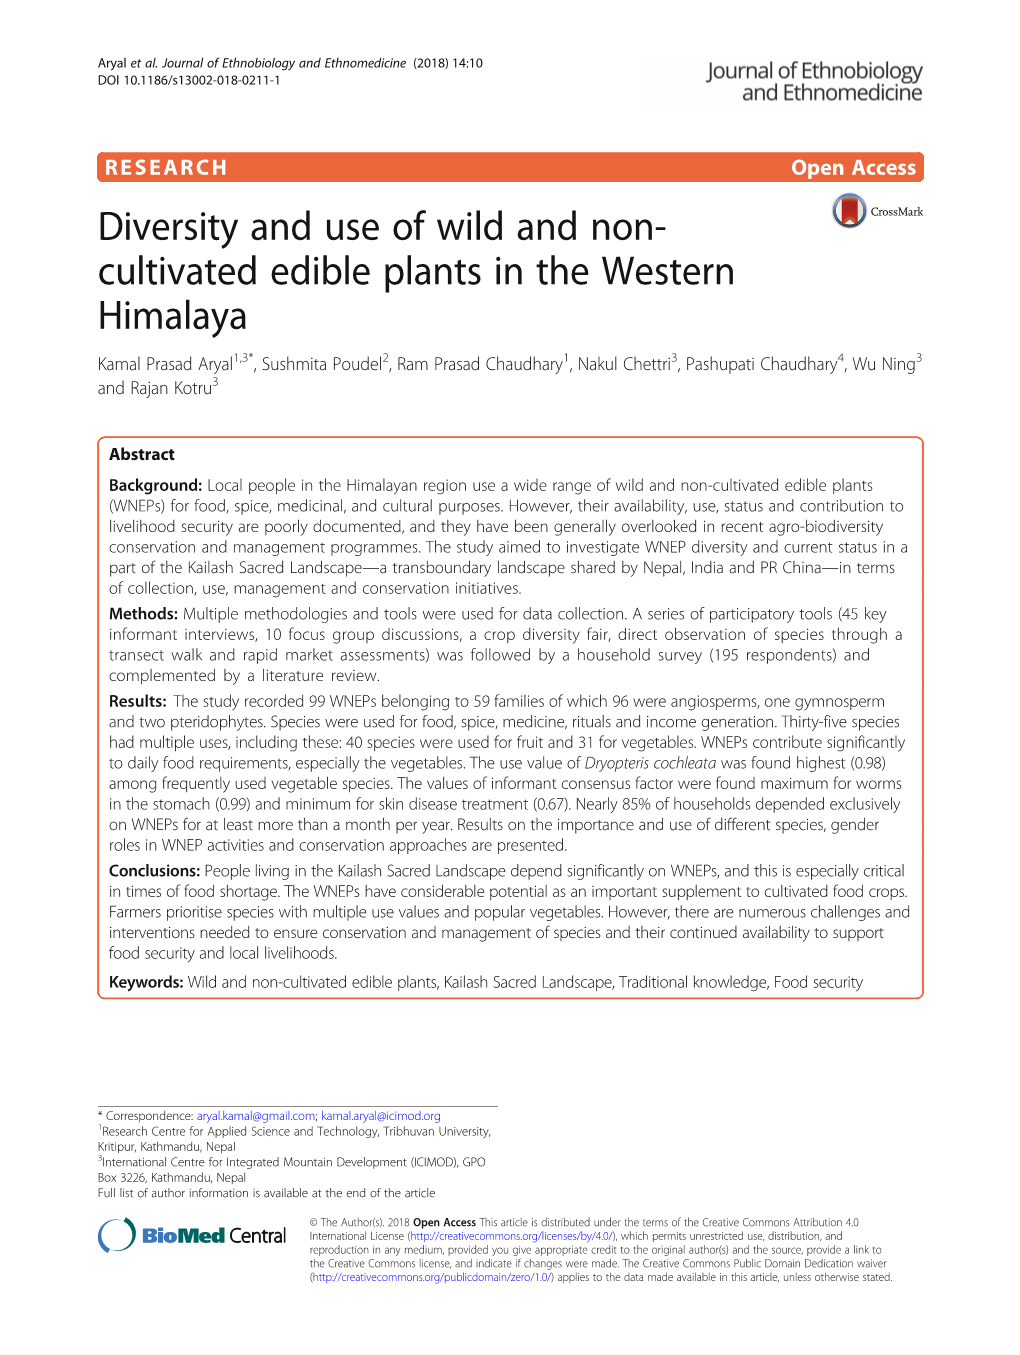 Diversity and Use of Wild and Non-Cultivated Edible Plants in The